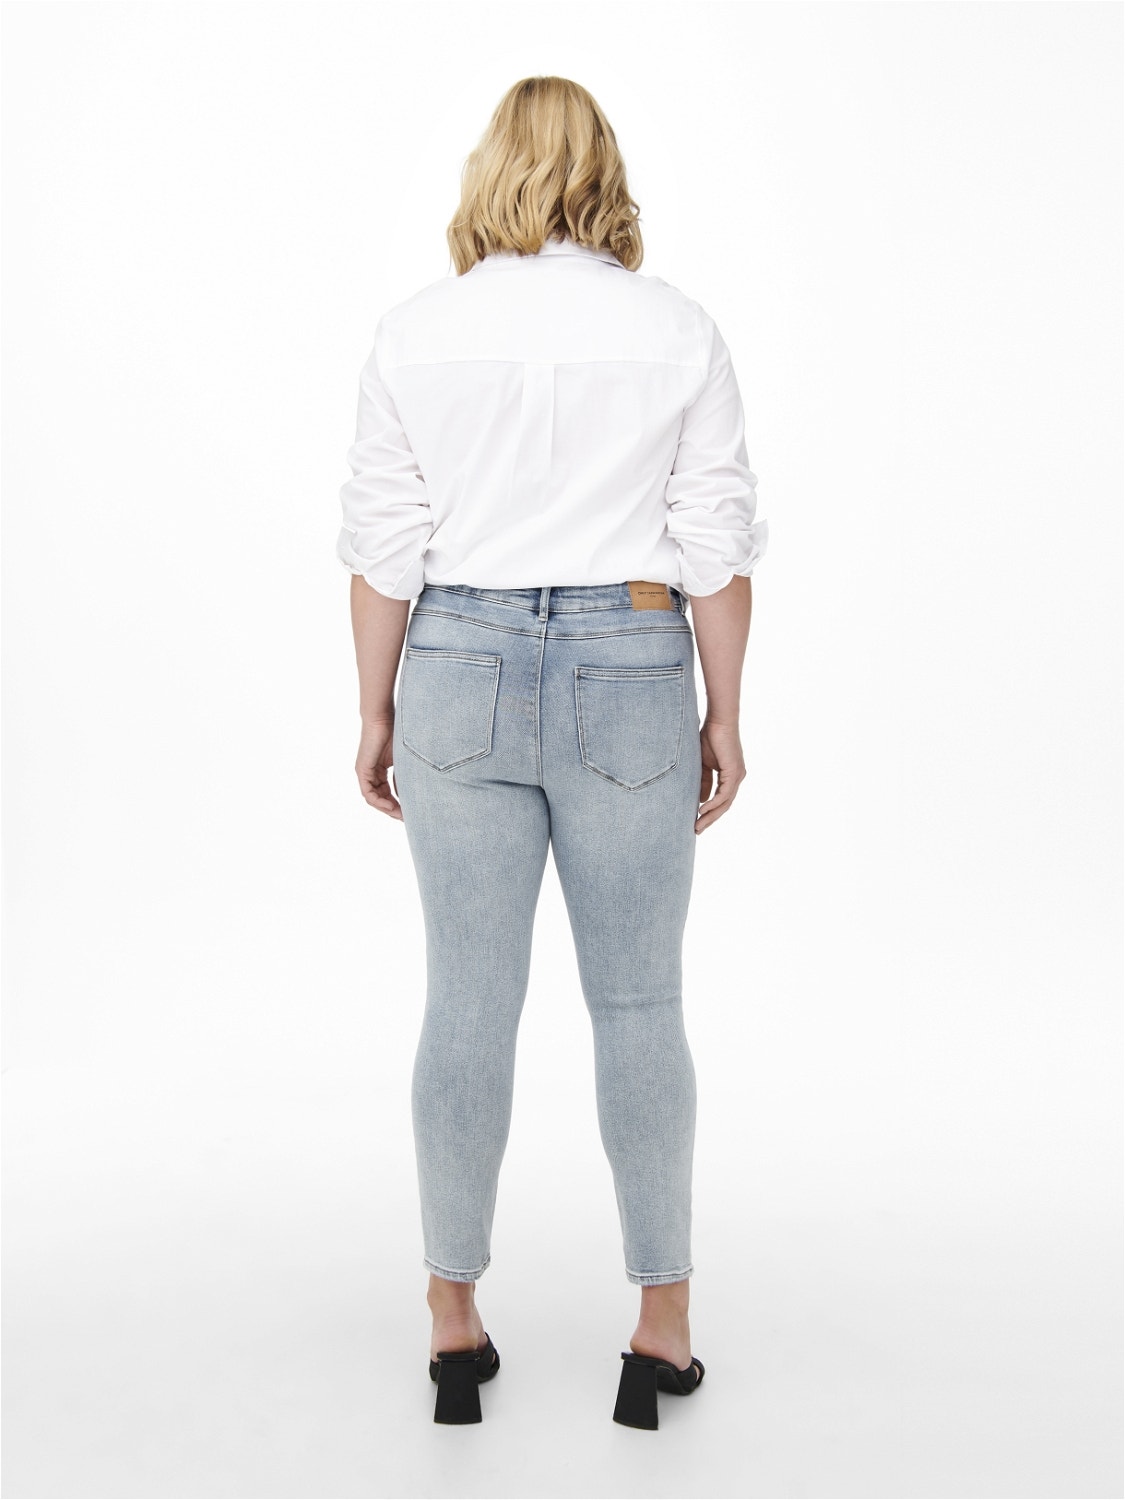 ONLY Jeans Skinny Fit Taille haute Curve -Light Blue Denim - 15260592